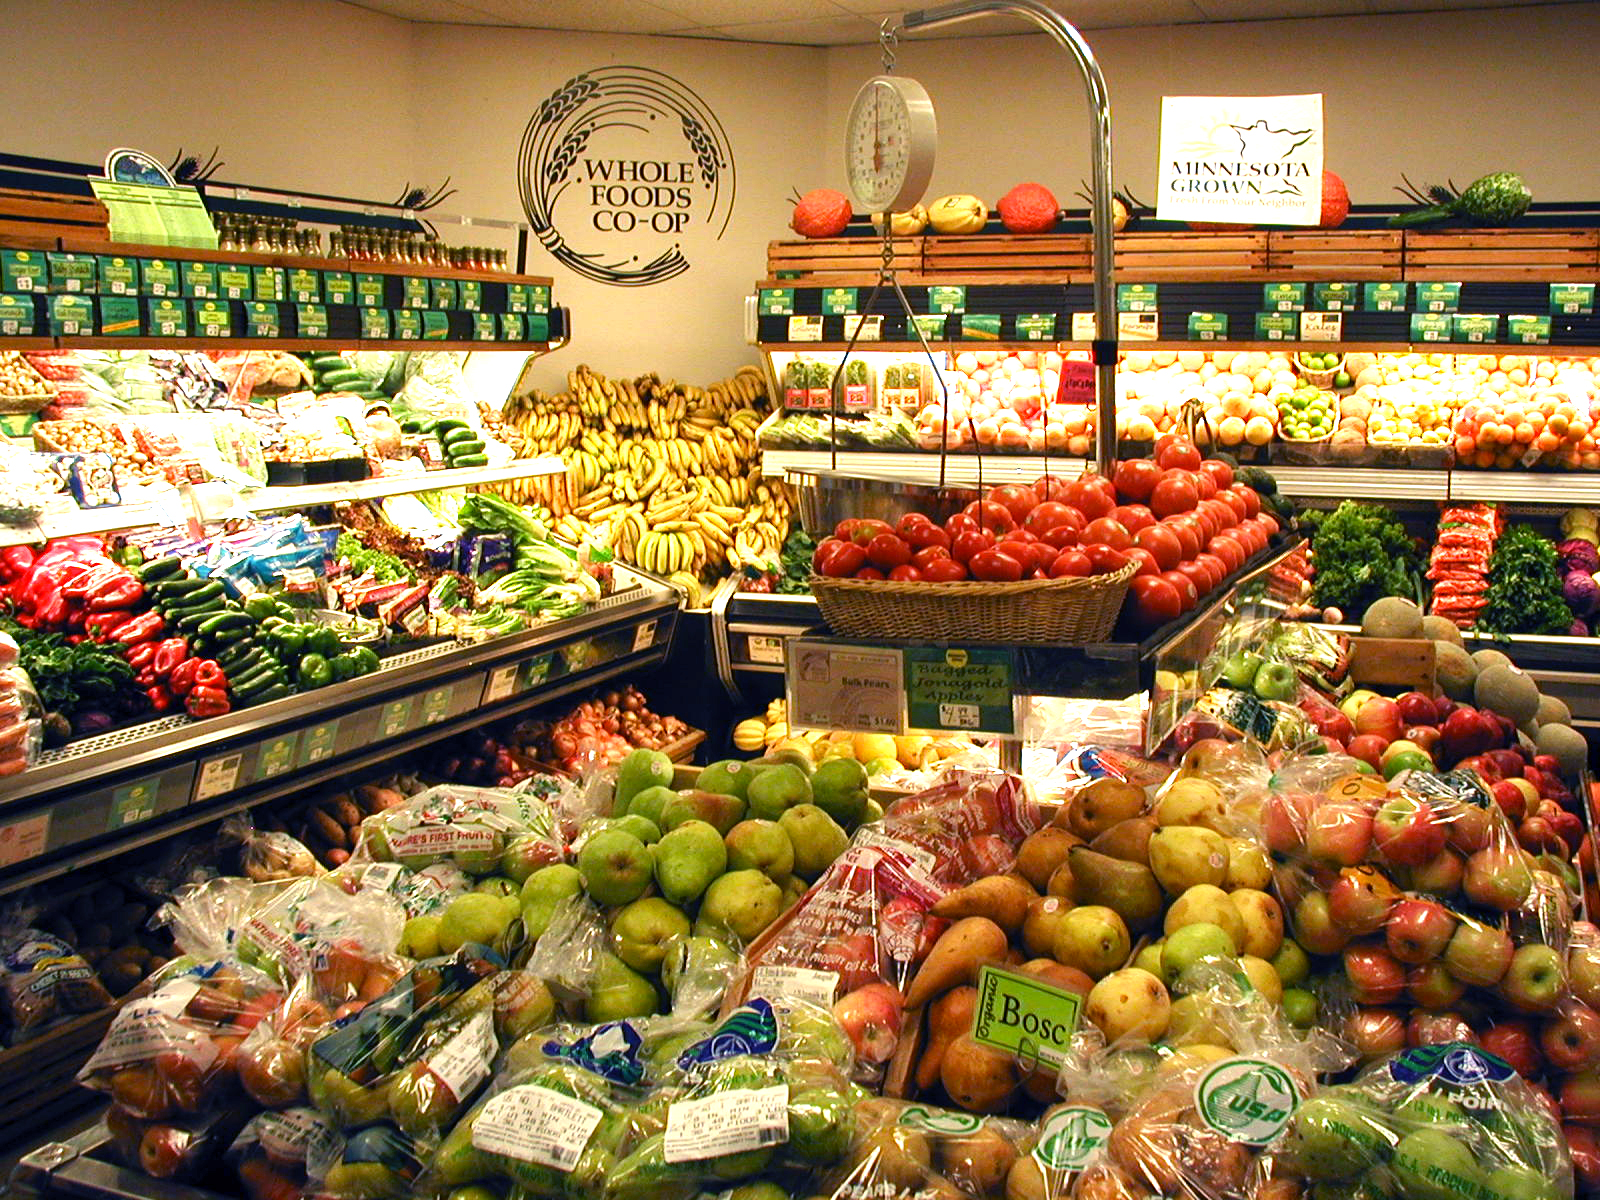 A well-lit grocery store produce section. Shelves are filled with a variety of fresh vegetables and fruits, including bananas, tomatoes, apples, pears, and bags of produce. Signs reading "WHoLE FOODS CO•OP Duluth MN" and "MINNESOTA GROWN" are displayed above the shelves.